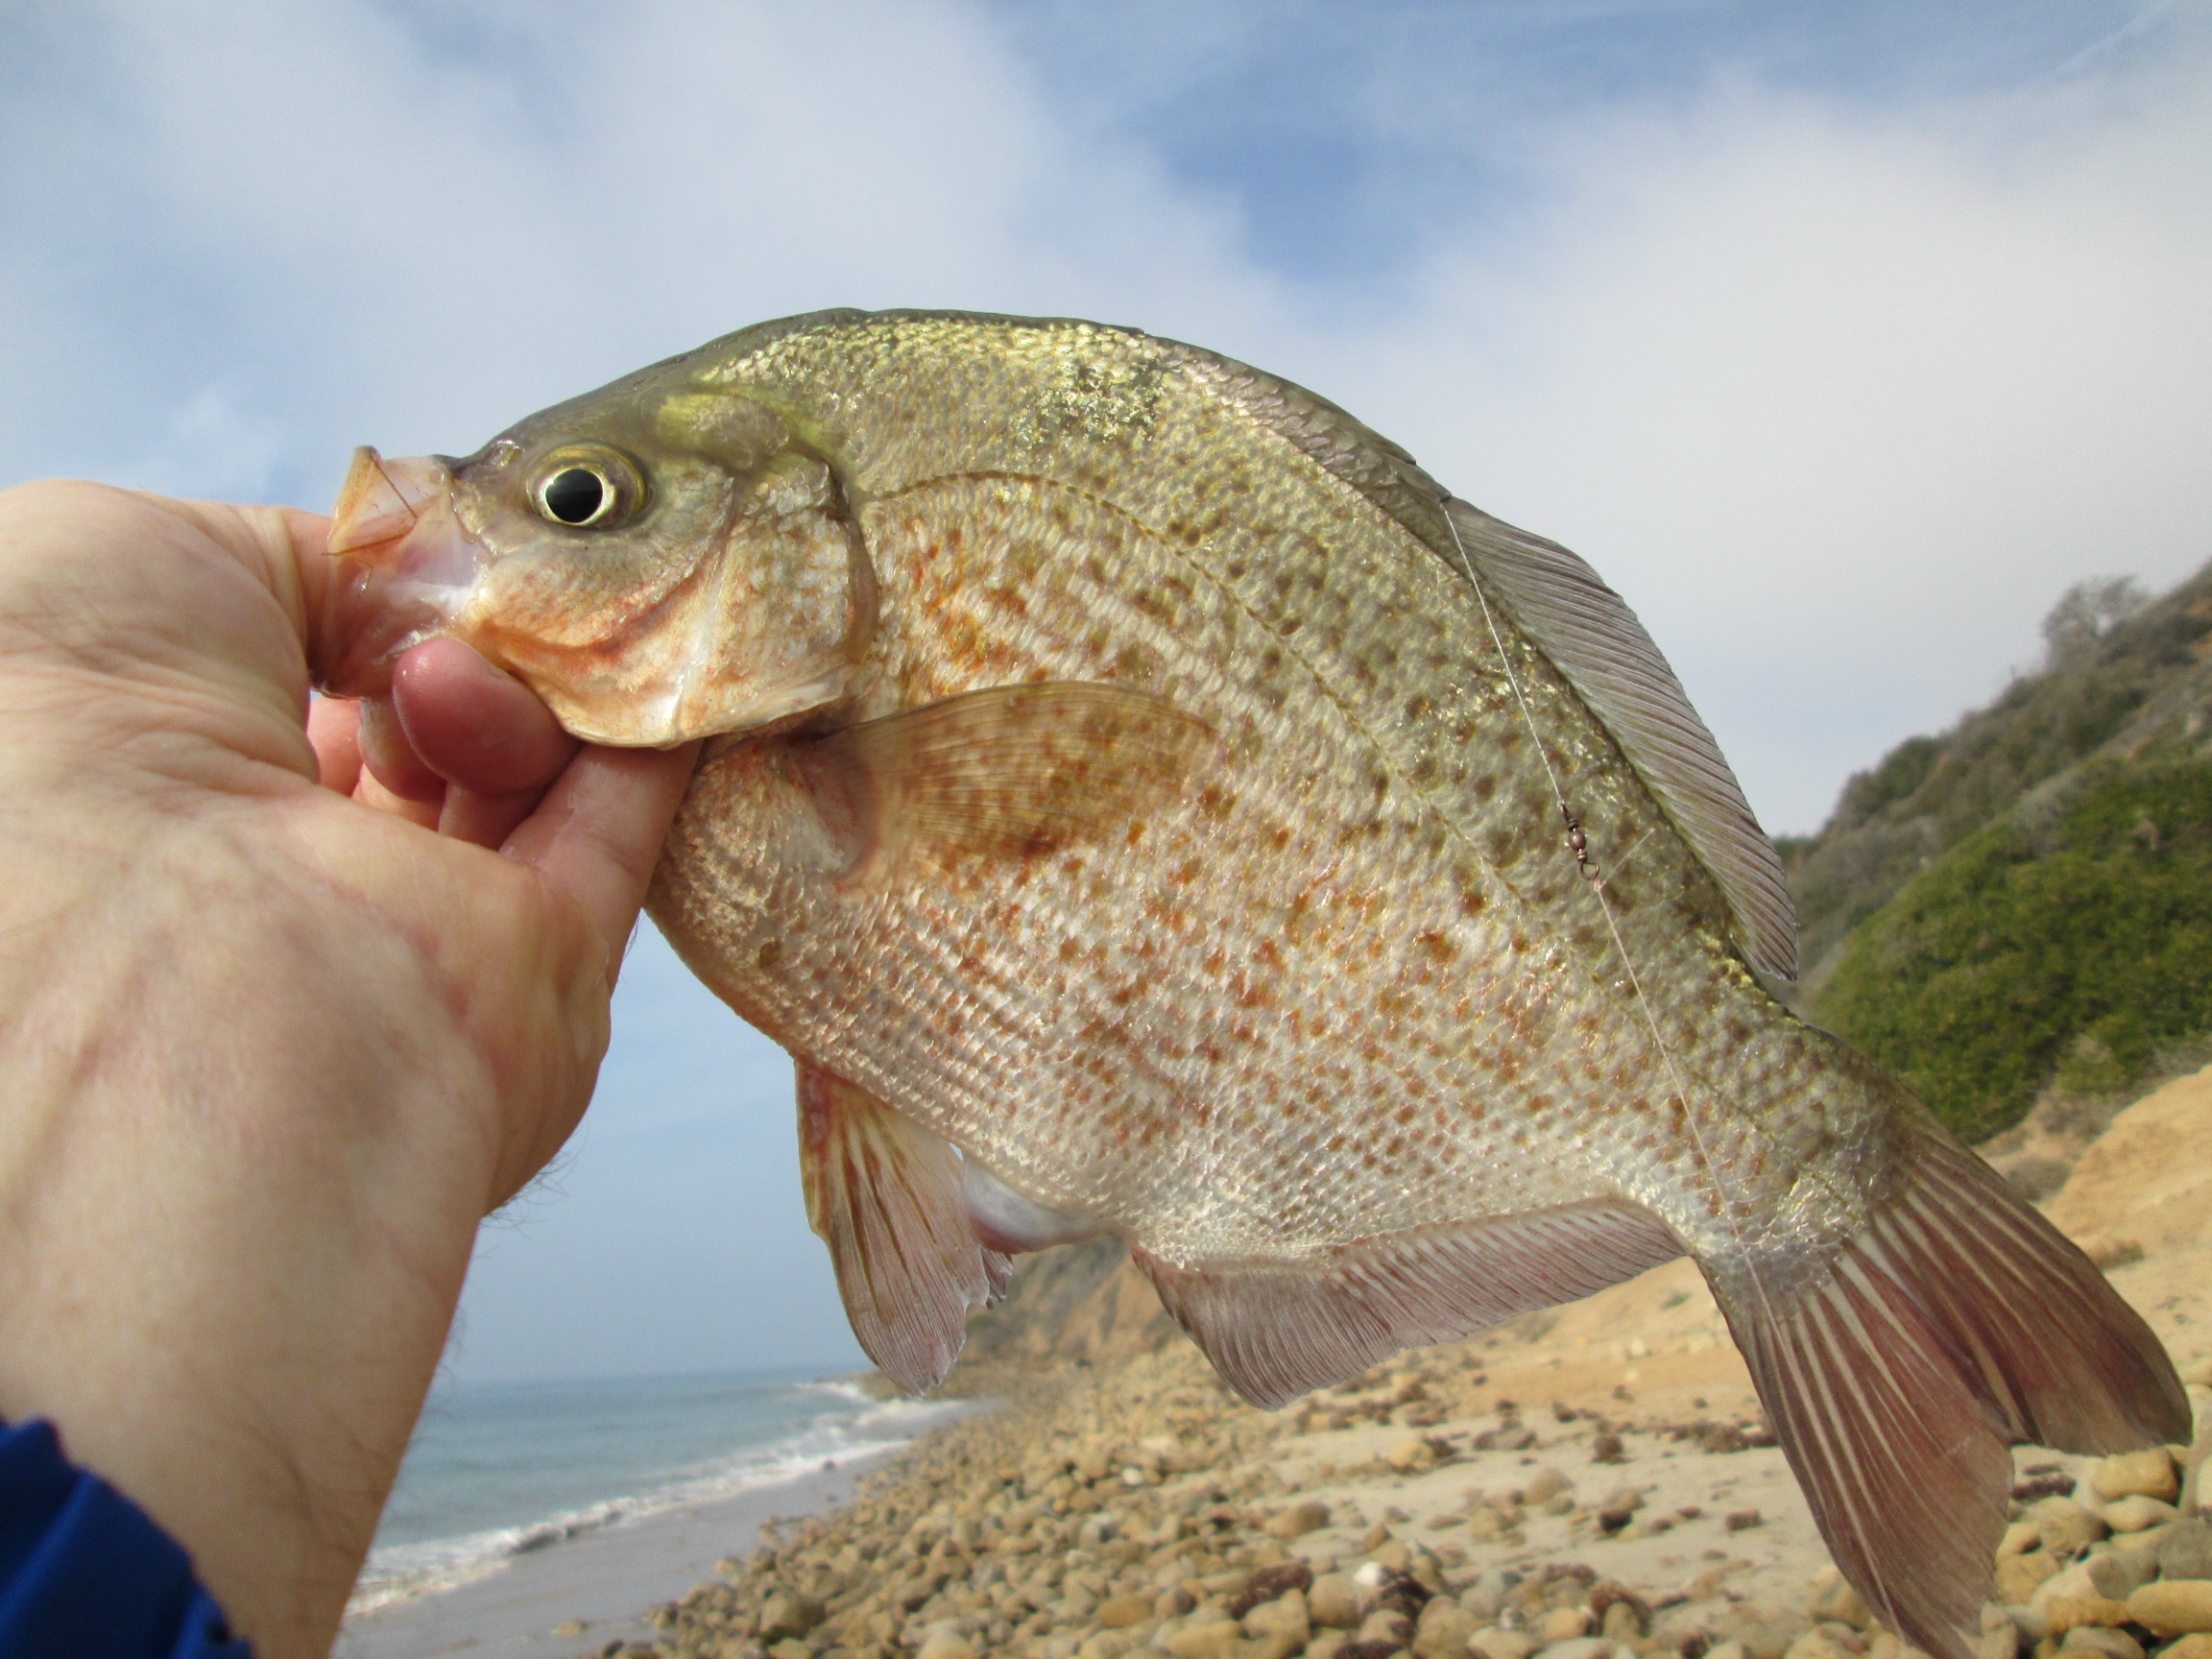 The Ecological Angler - Fly Fishing for Surfperch in California